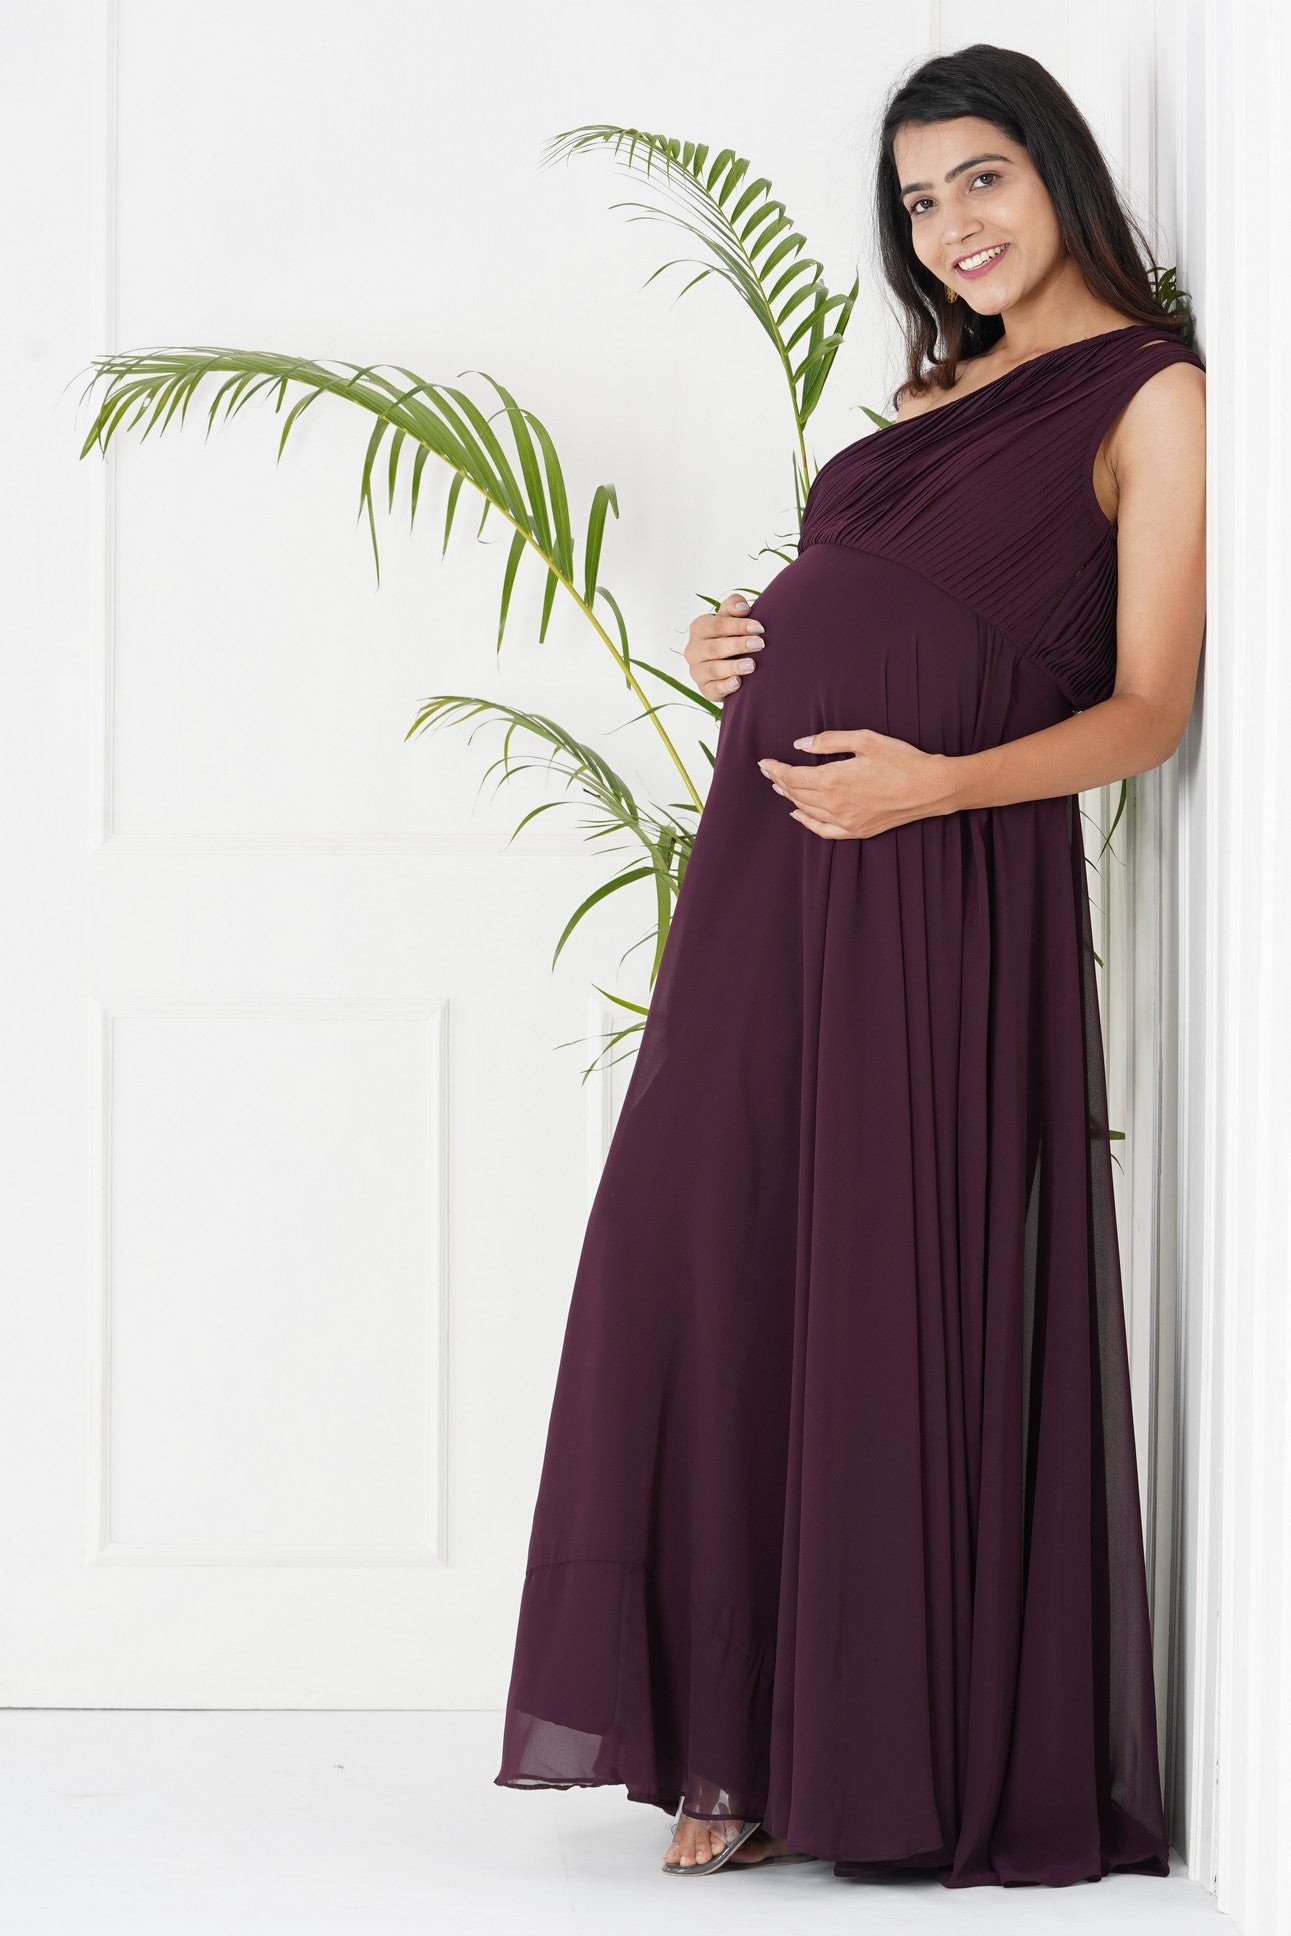 Pregnancy Gowns For Photo Shoot Velvet Gown Baby Shower Dress For Women  Pregnant Woman Neck Maternity Dress Photography R230519 From Nickyoung06,  $17.6 | DHgate.Com